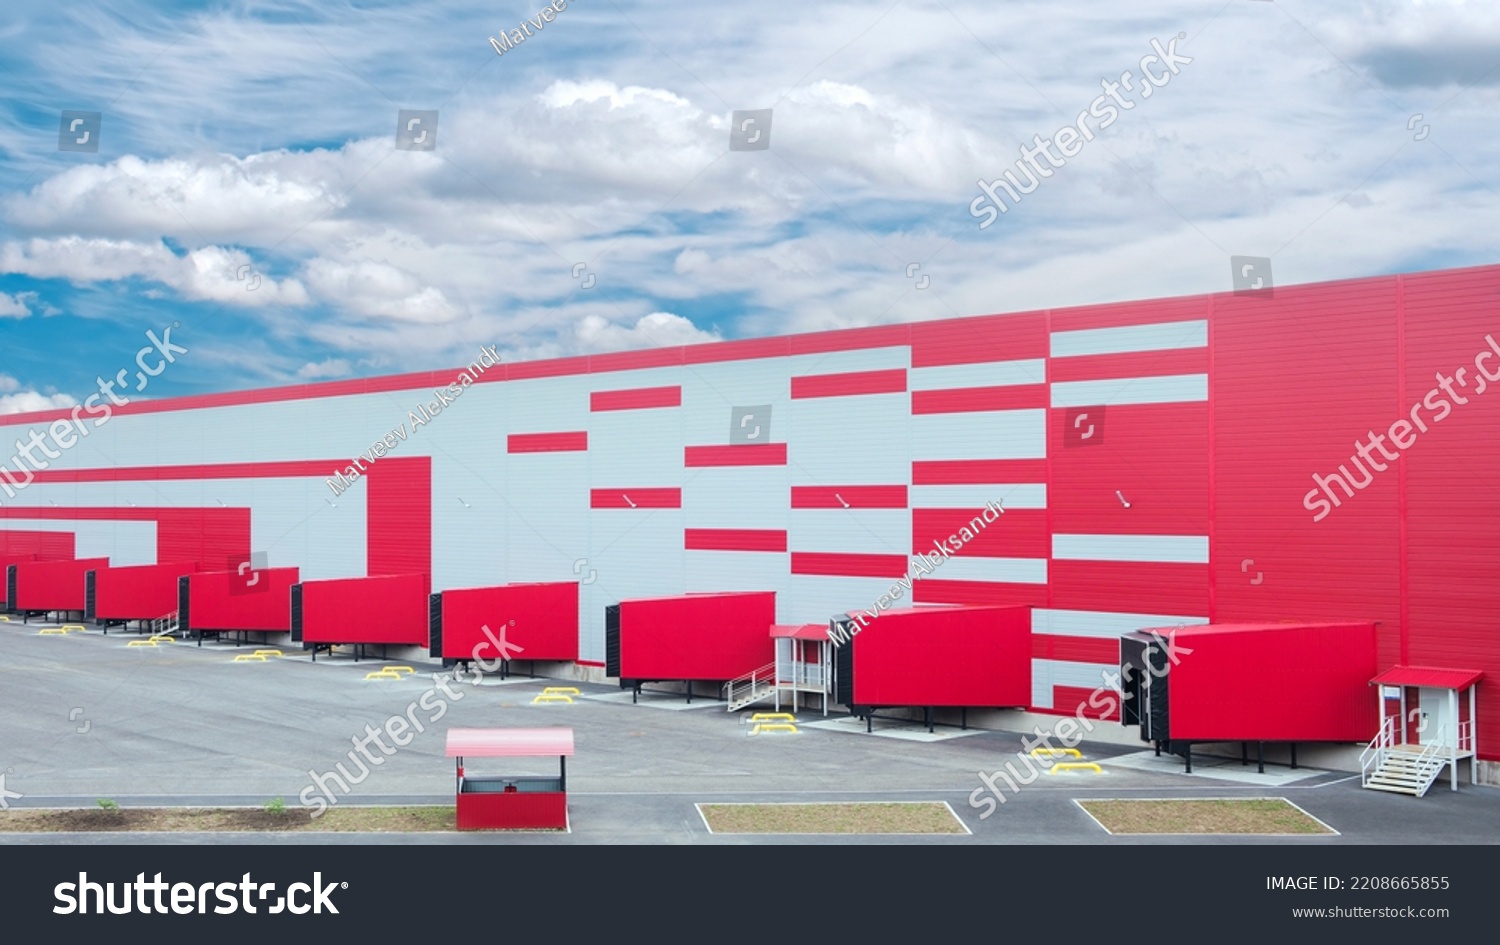 Entrance ramps of a large distribution warehouse with gates for loading goods, warehouse and transport concept #2208665855